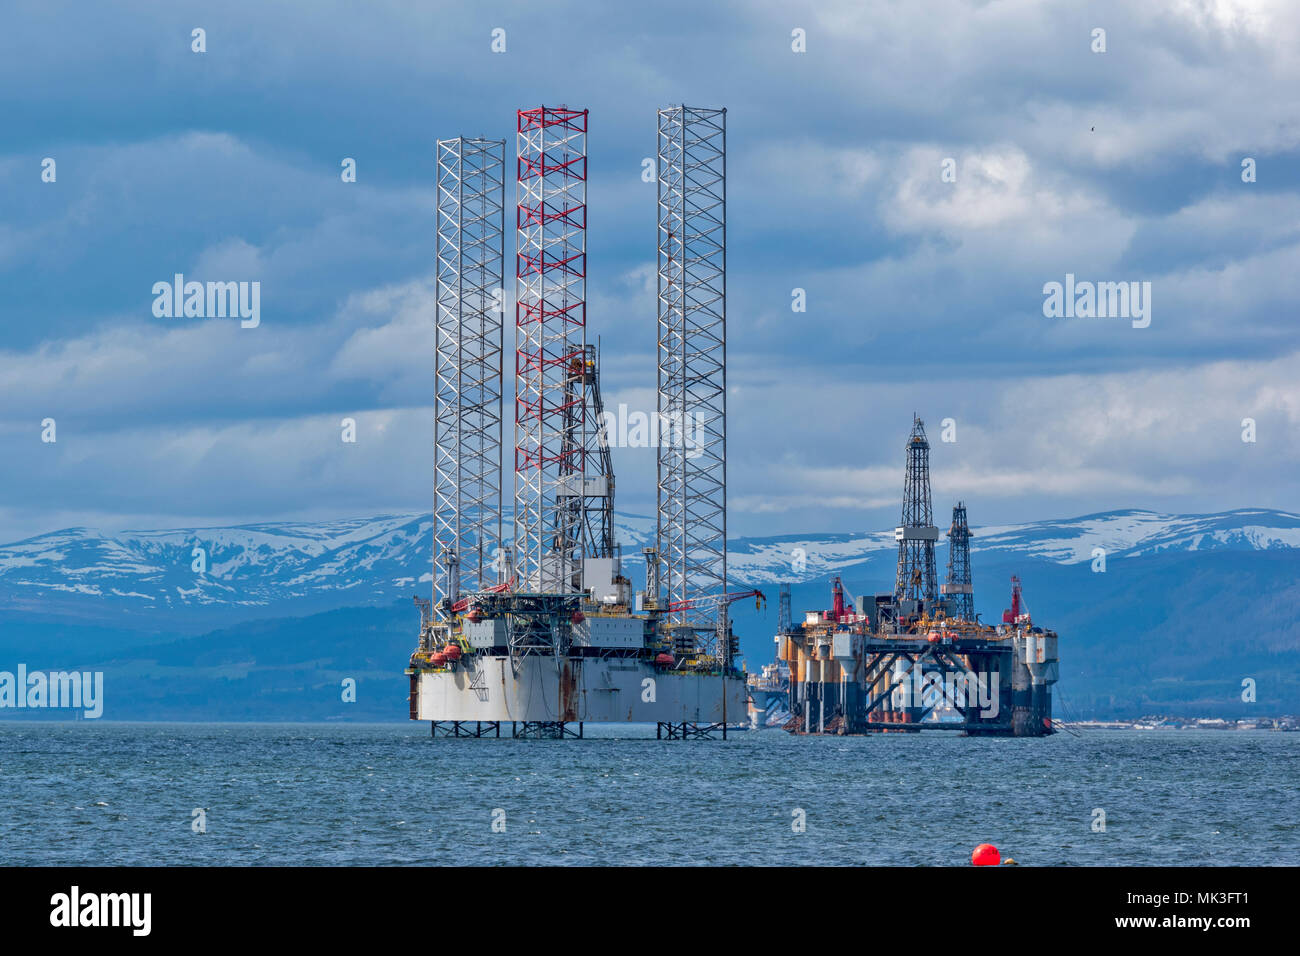 CROMARTY FIRTH SCOTLAND BAUG OIL DRILLING PLATFORM AND TOWERS WITH  DECOMMISSIONED OR REPAIRED OIL RIG LYING OFF CROMARTY VILLAGE Stock Photo